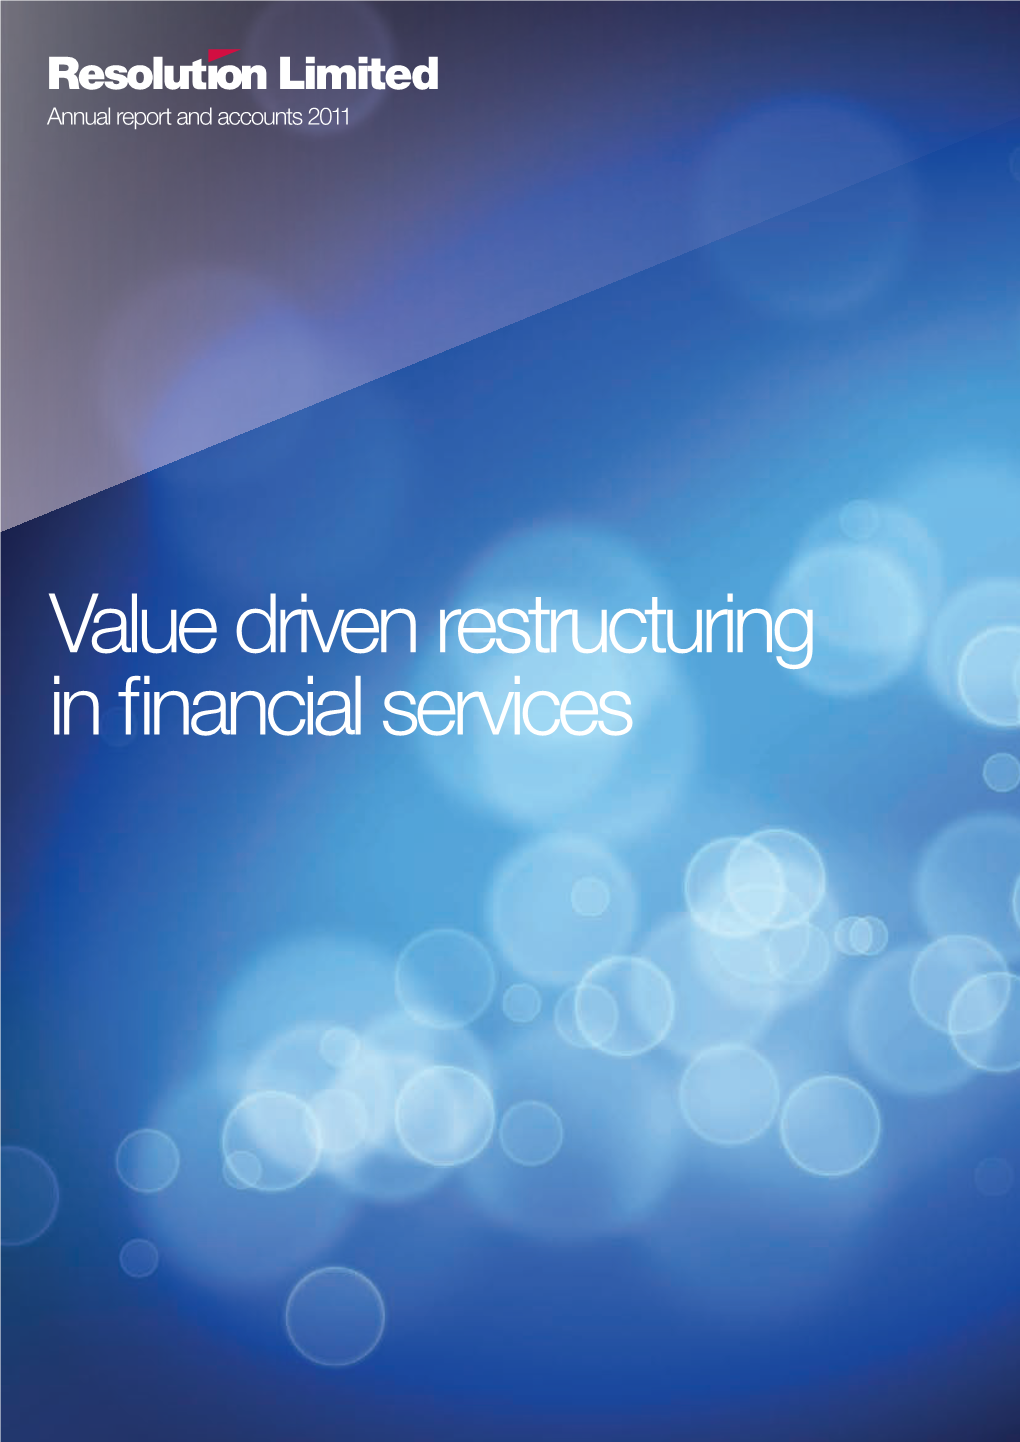 Resolution Ltd Annual Report and Accounts 2011